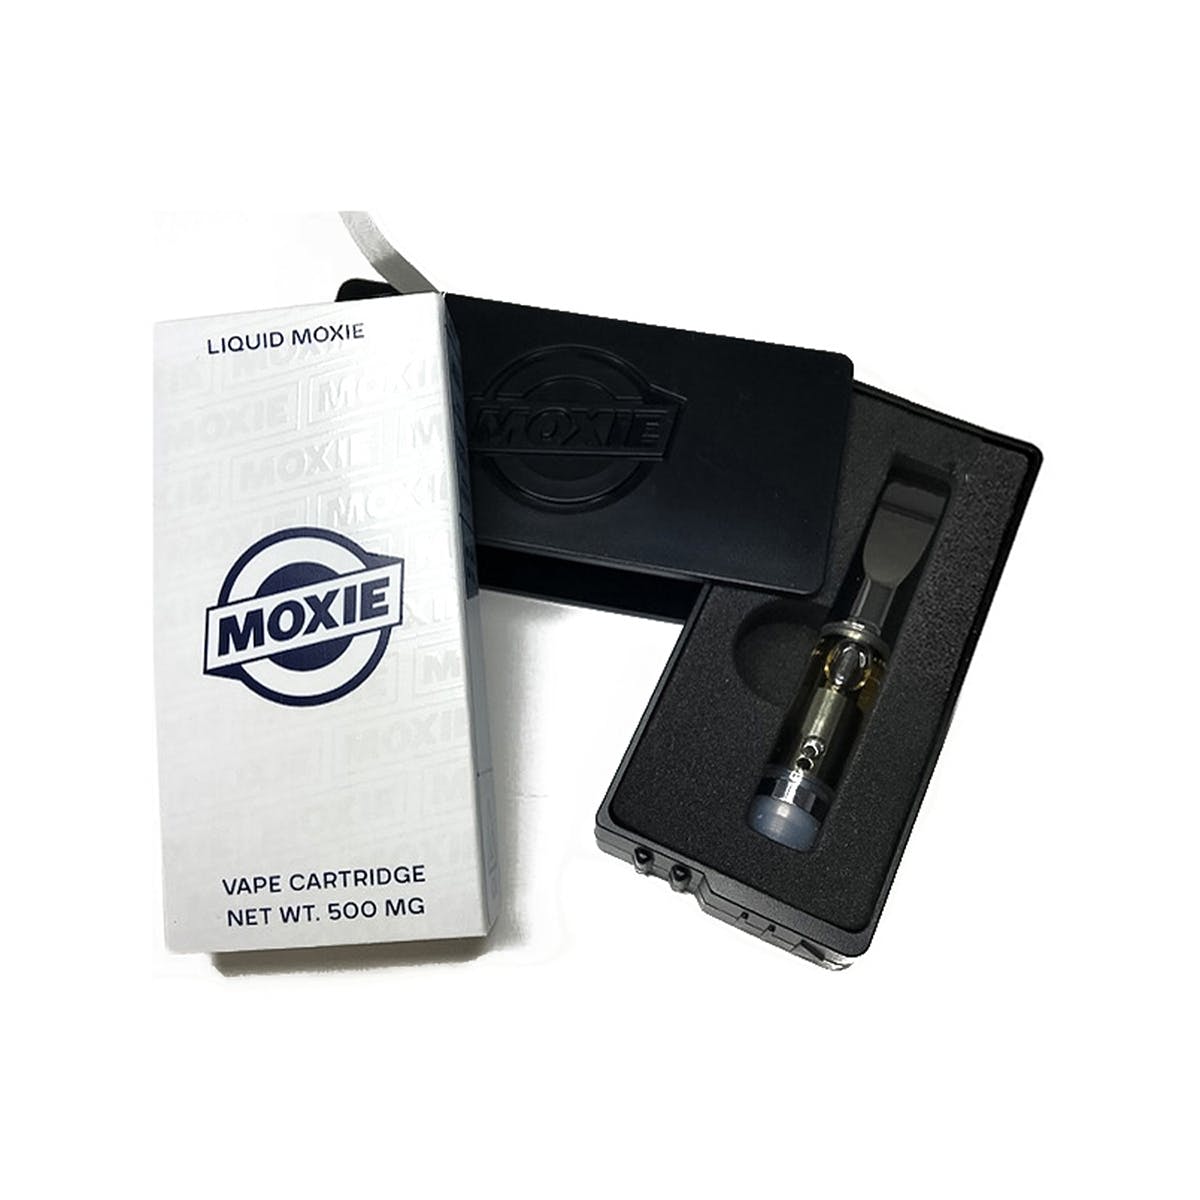 marijuana-dispensaries-cathedral-city-care-collective-north-in-cathedral-city-melonwreck-liquid-moxie-cartridge